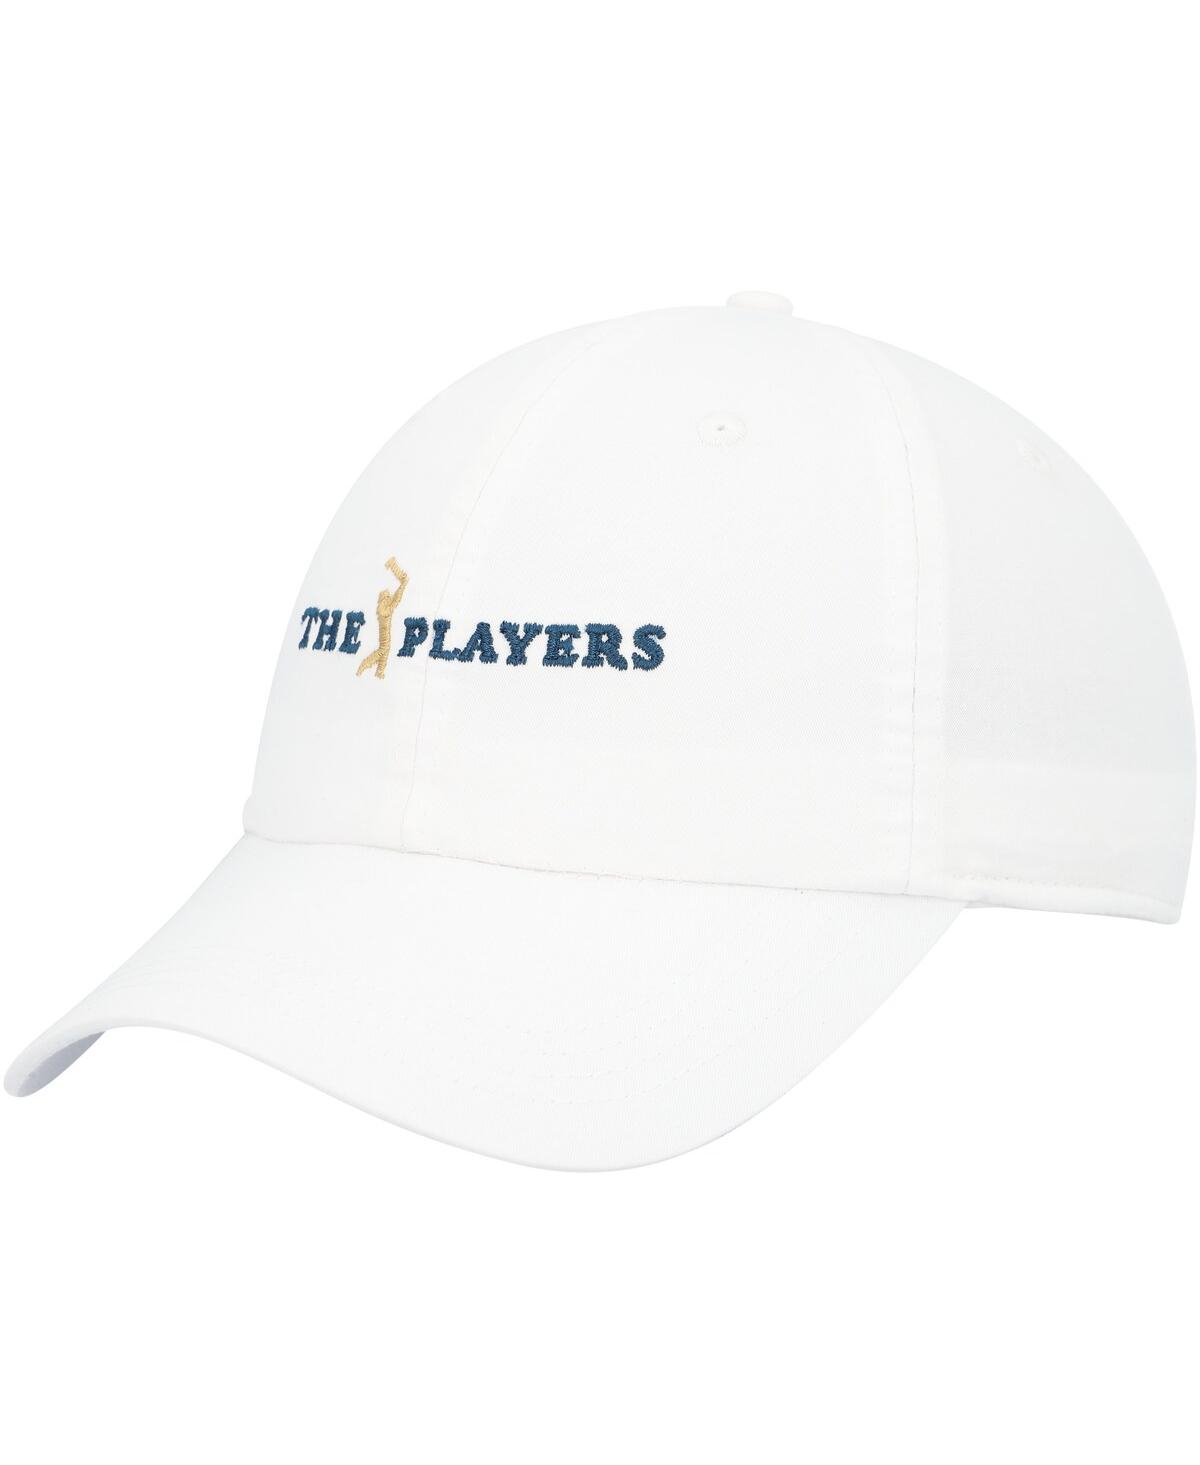 Men's Ahead White The Players Shawmut Adjustable Hat - White